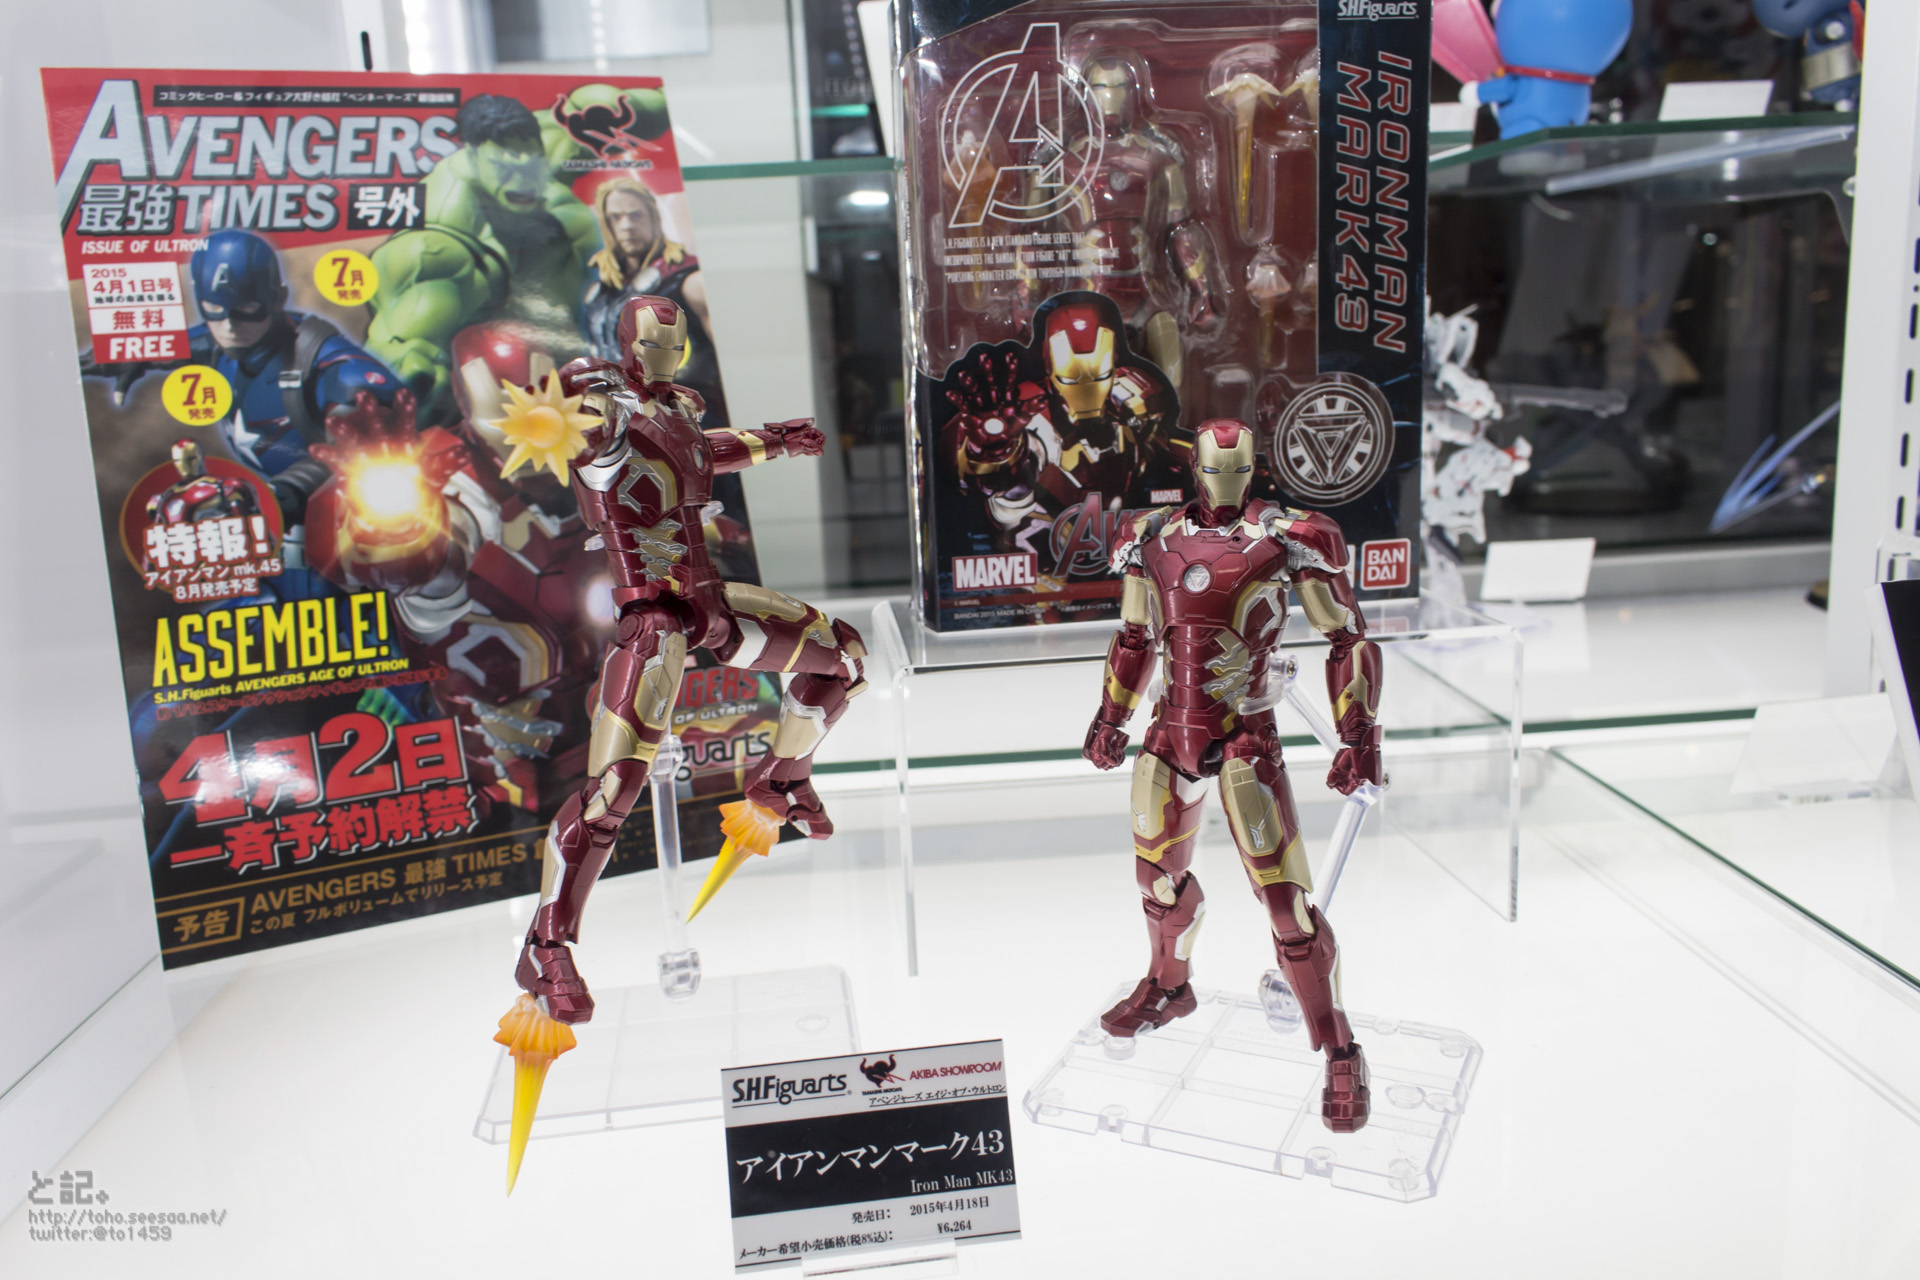 Details about   Bandai S.H Figuarts Iron Man Mark 45 Action Figure Marvel Age of Ultron 